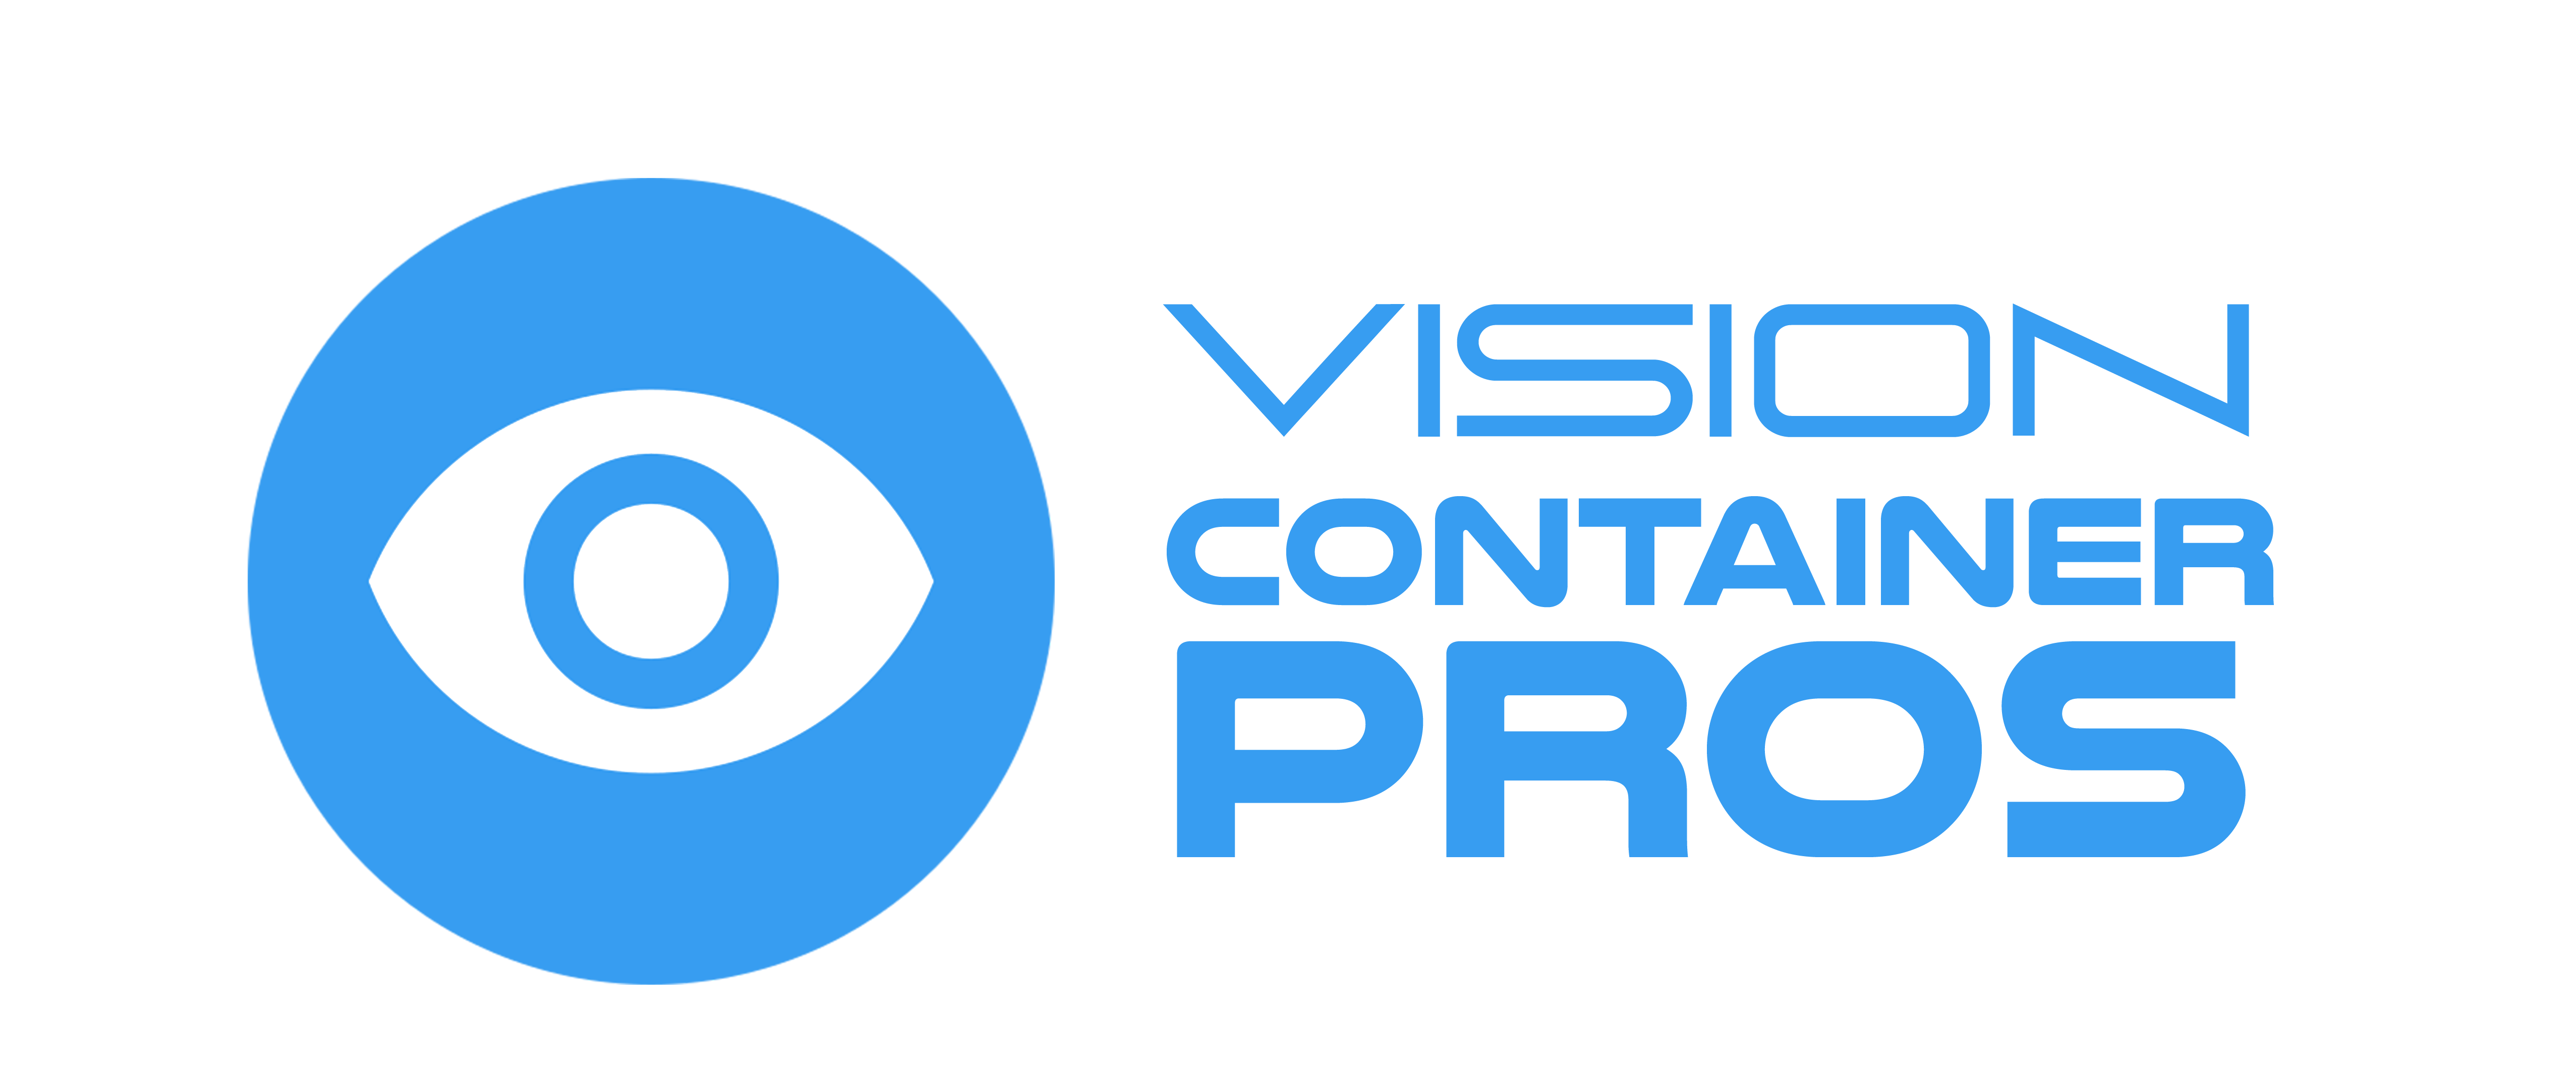 Container Vision Pros